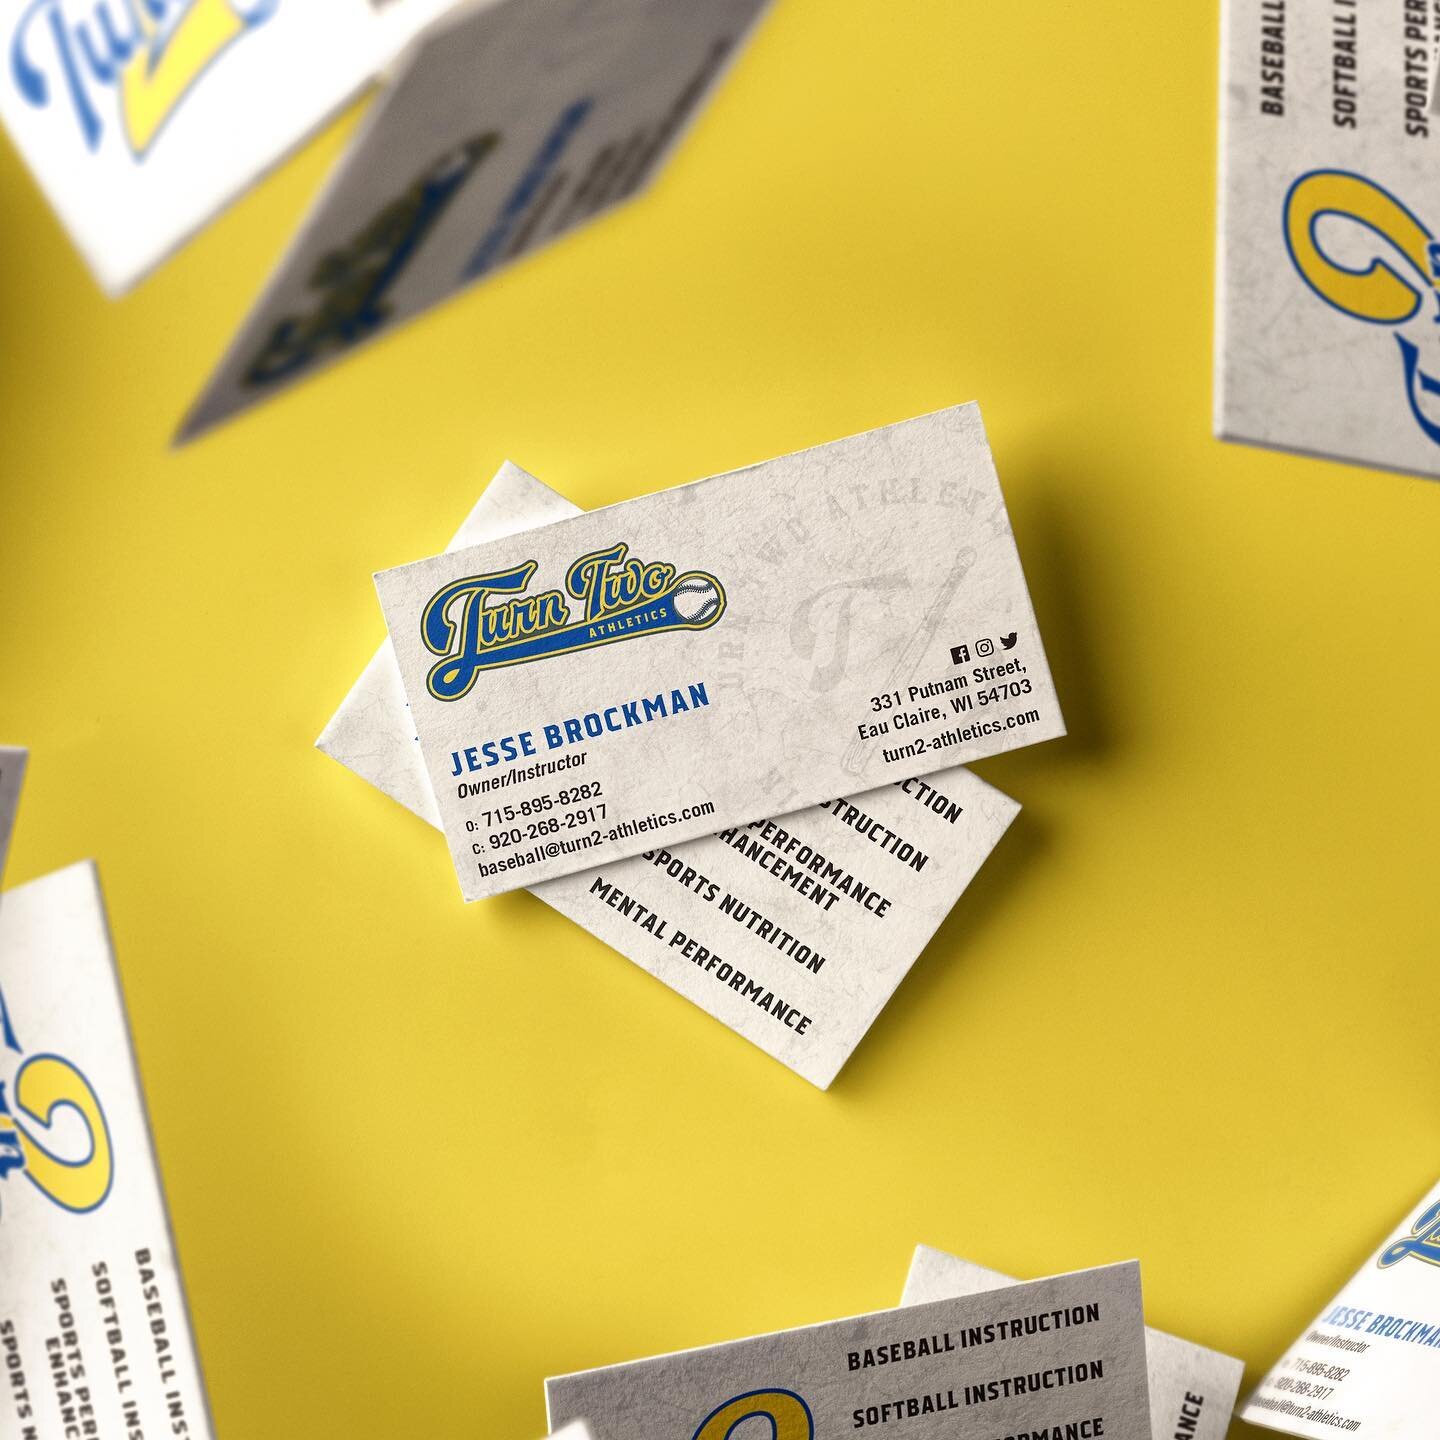 Check out the business cards we helped create for @turn2_athletics after their logo and branding was finalized. They were printed on 14pt uncoated natural stock to give the cards an aged authentic look. 

#businesscasual #businesscards #graphicdesign